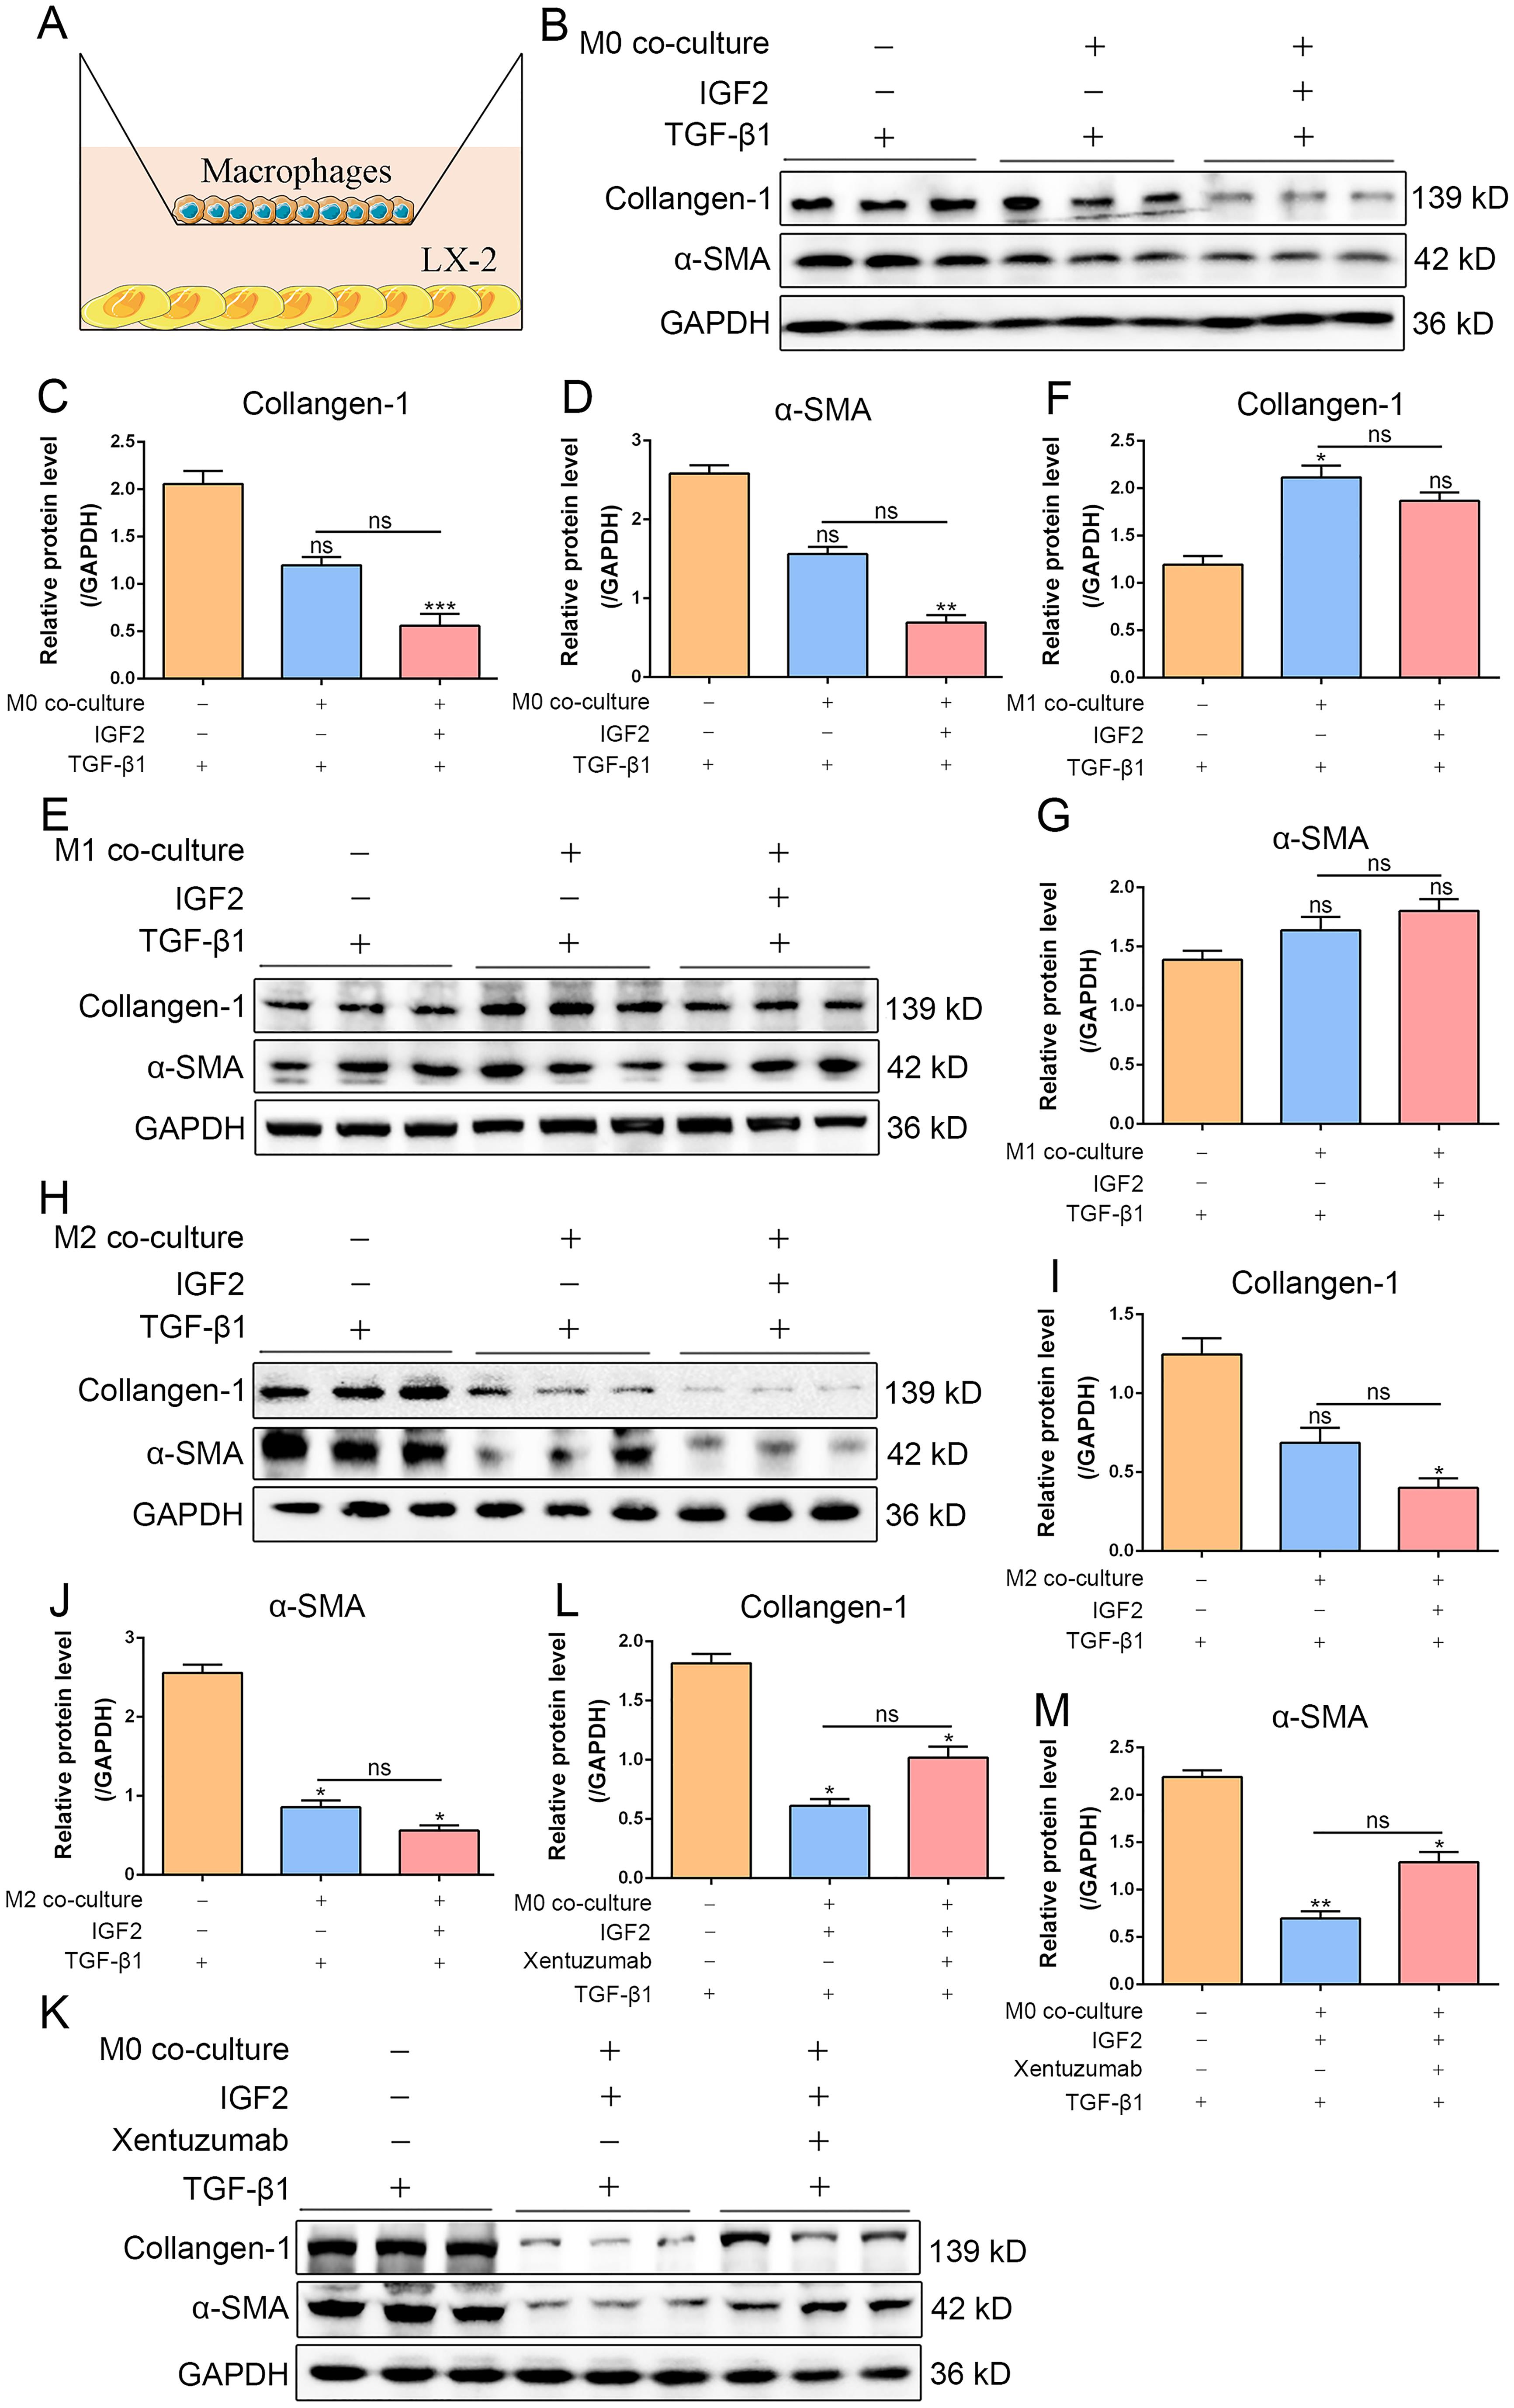 The IGF2-NR4A2 pathway inhibits the activation of the HSCs by mediating macrophage polarization toward the M2 subtype.